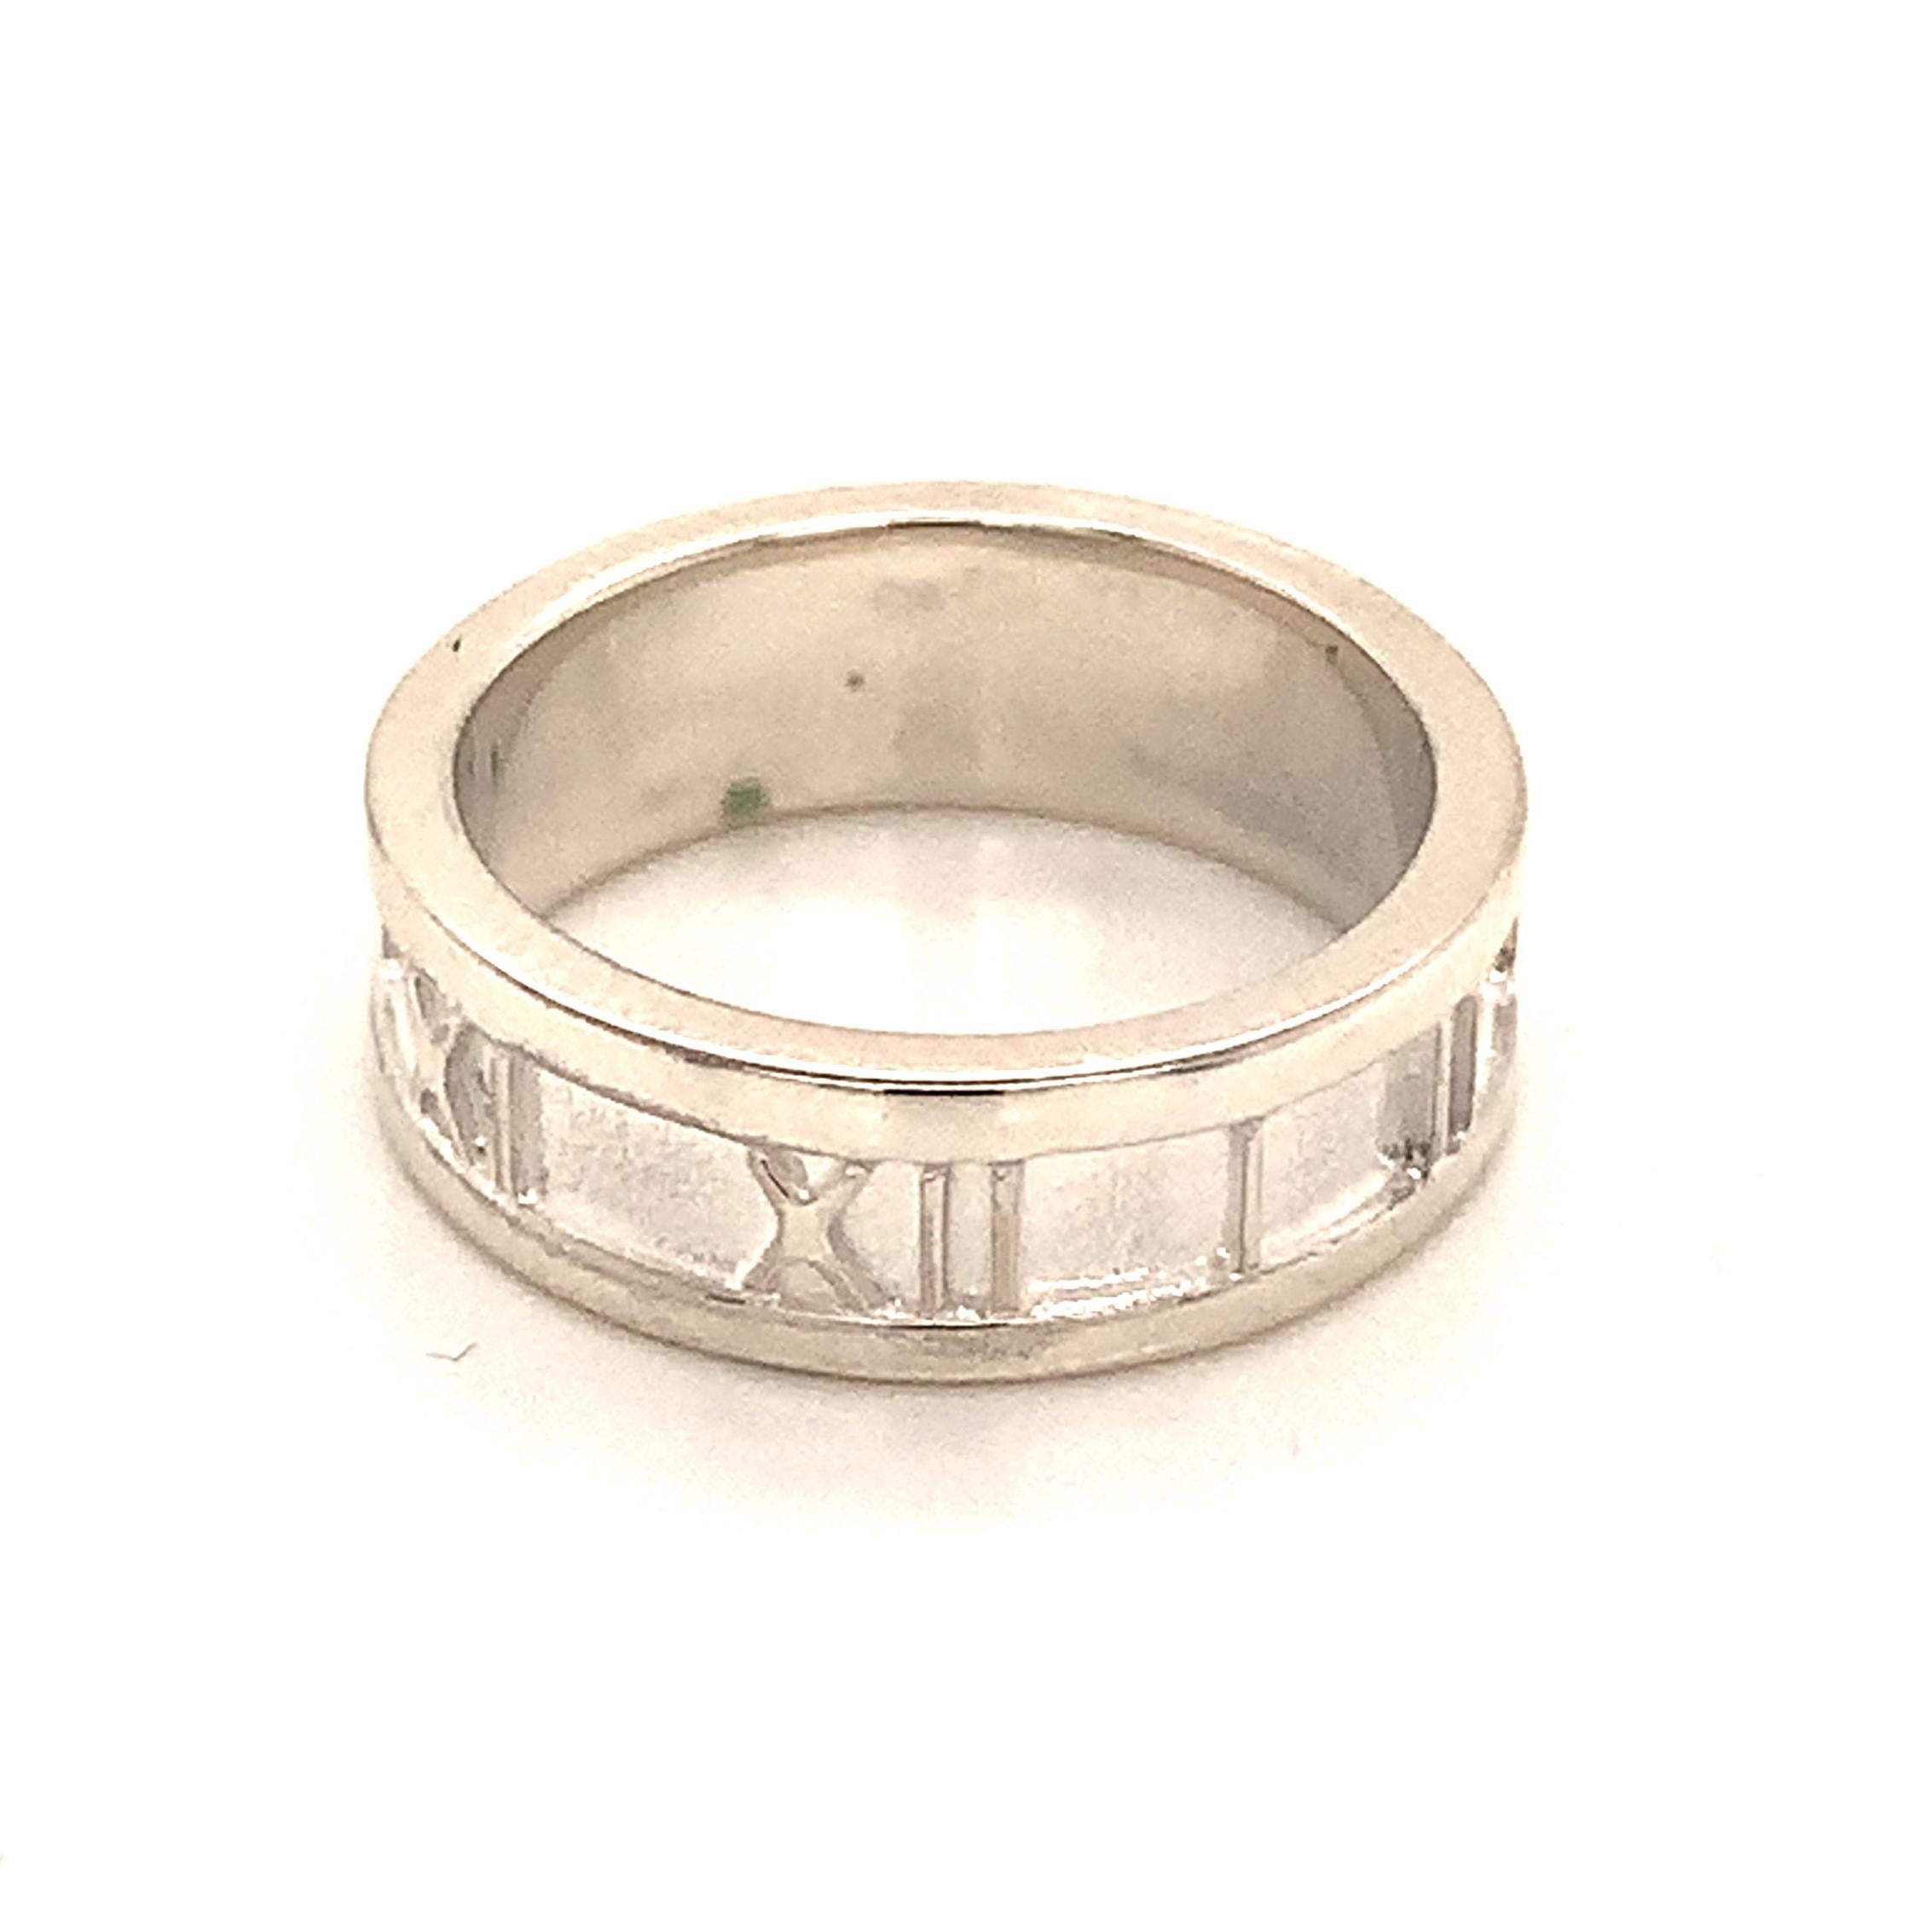 Tiffany & Co. Estate Ring Sterling Silver 4.7 Grams For Sale 2